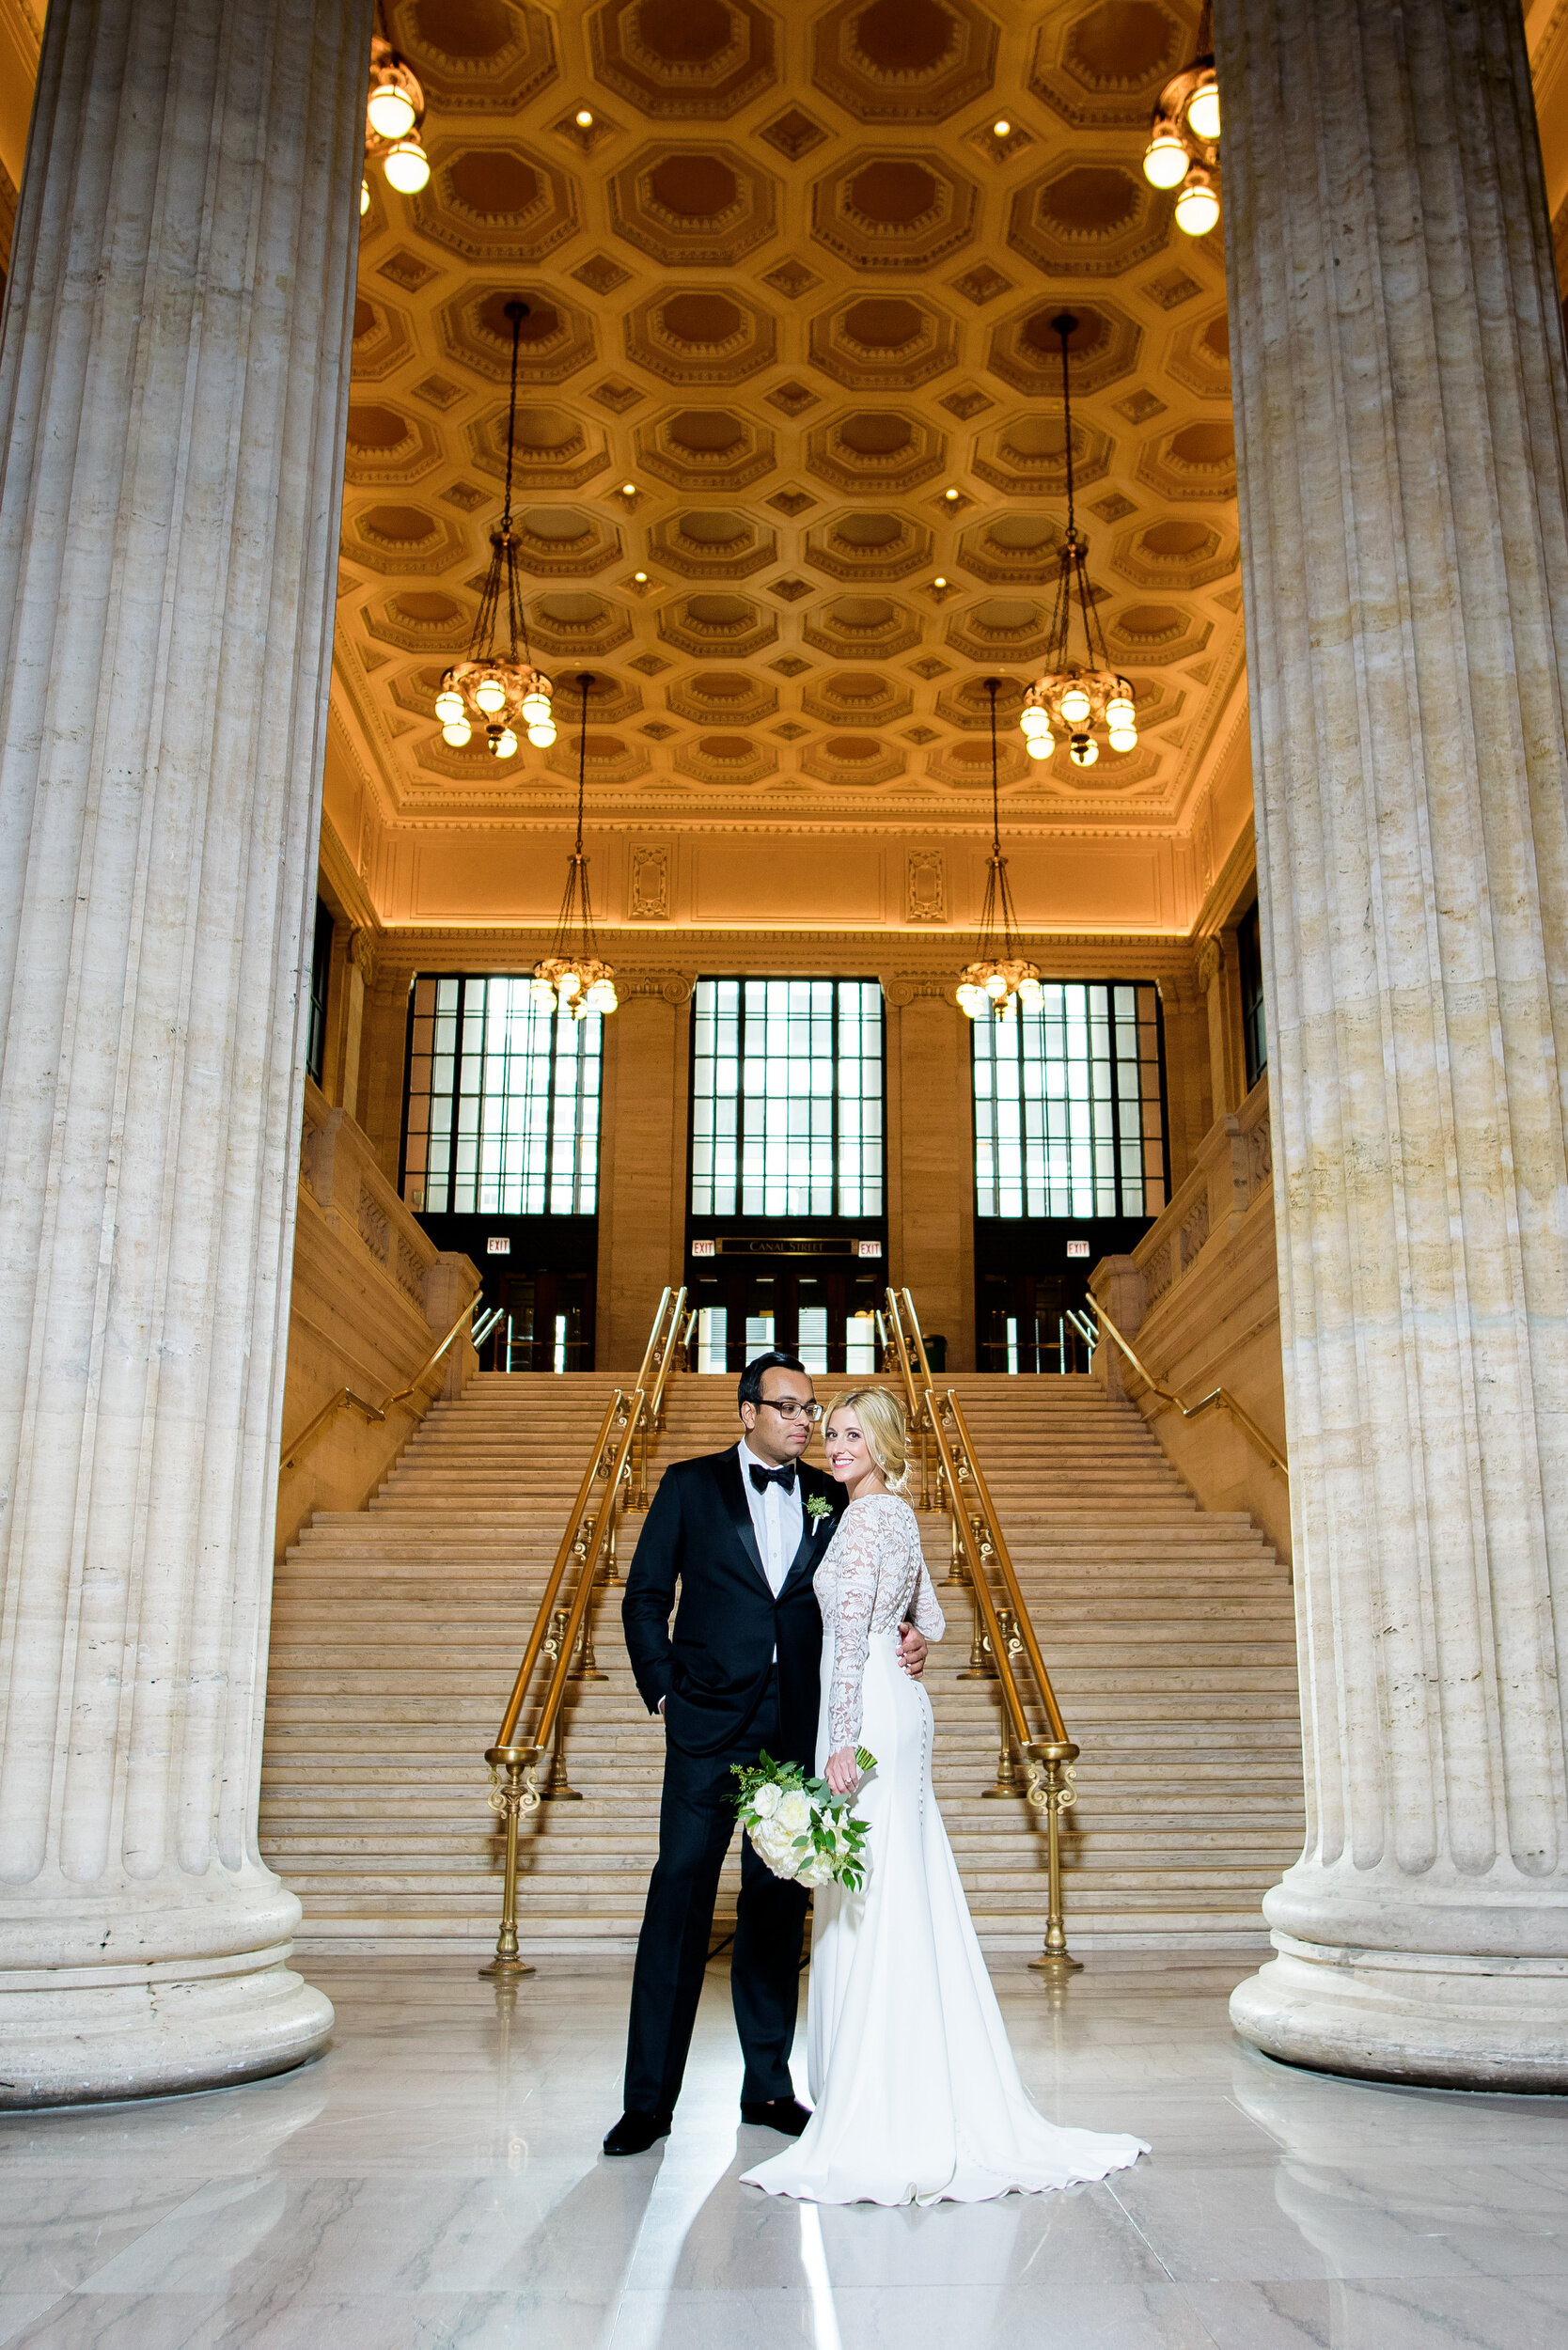 Bride and groom portrait at Chicago Union Station: Geraghty Chicago wedding photography captured by J. Brown Photography.